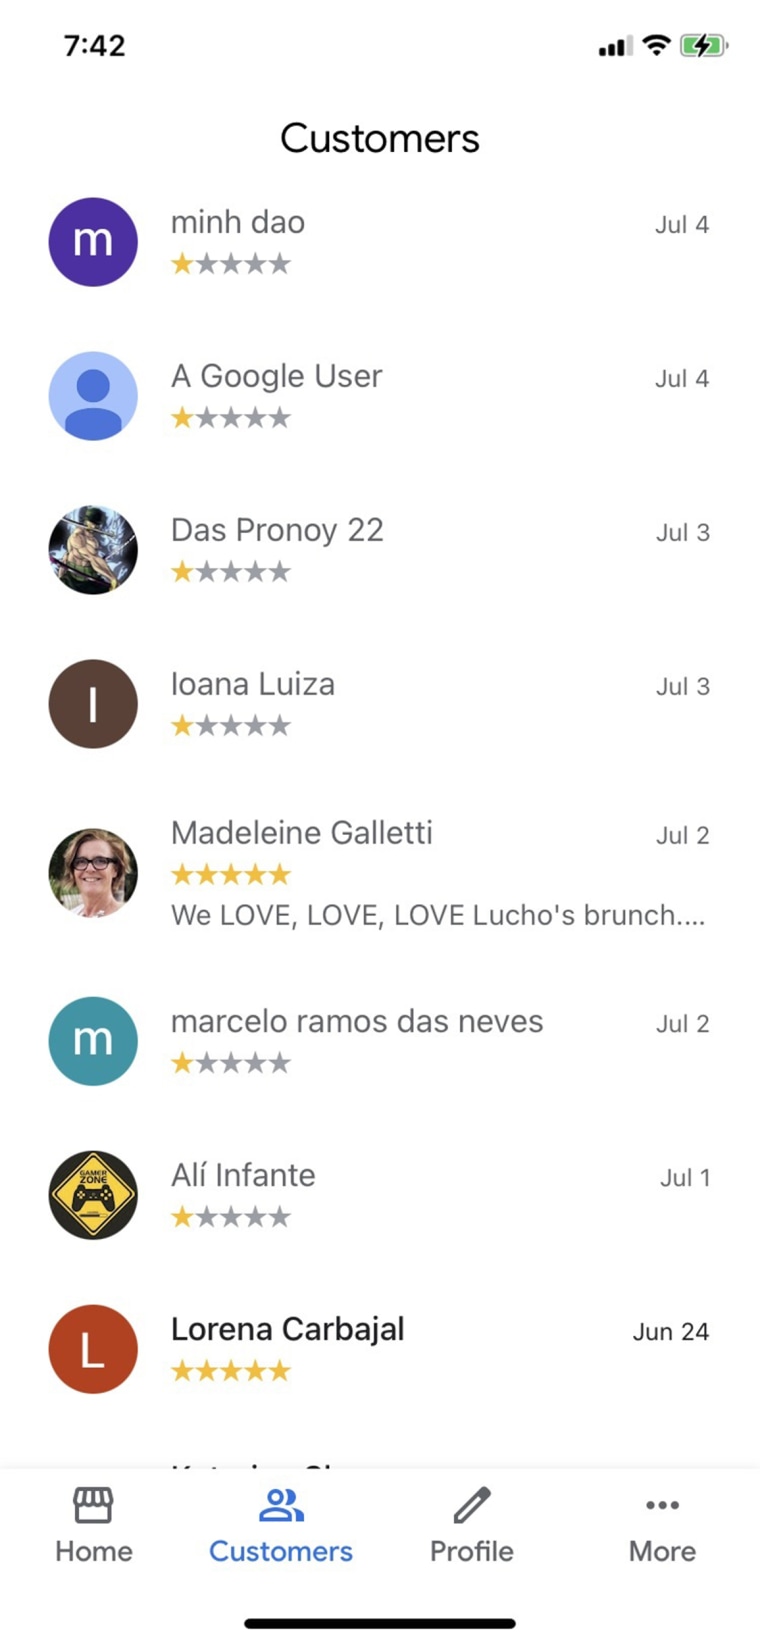 Customer reviews for restaurant Luchos which include several fraudulent one-star reviews. 